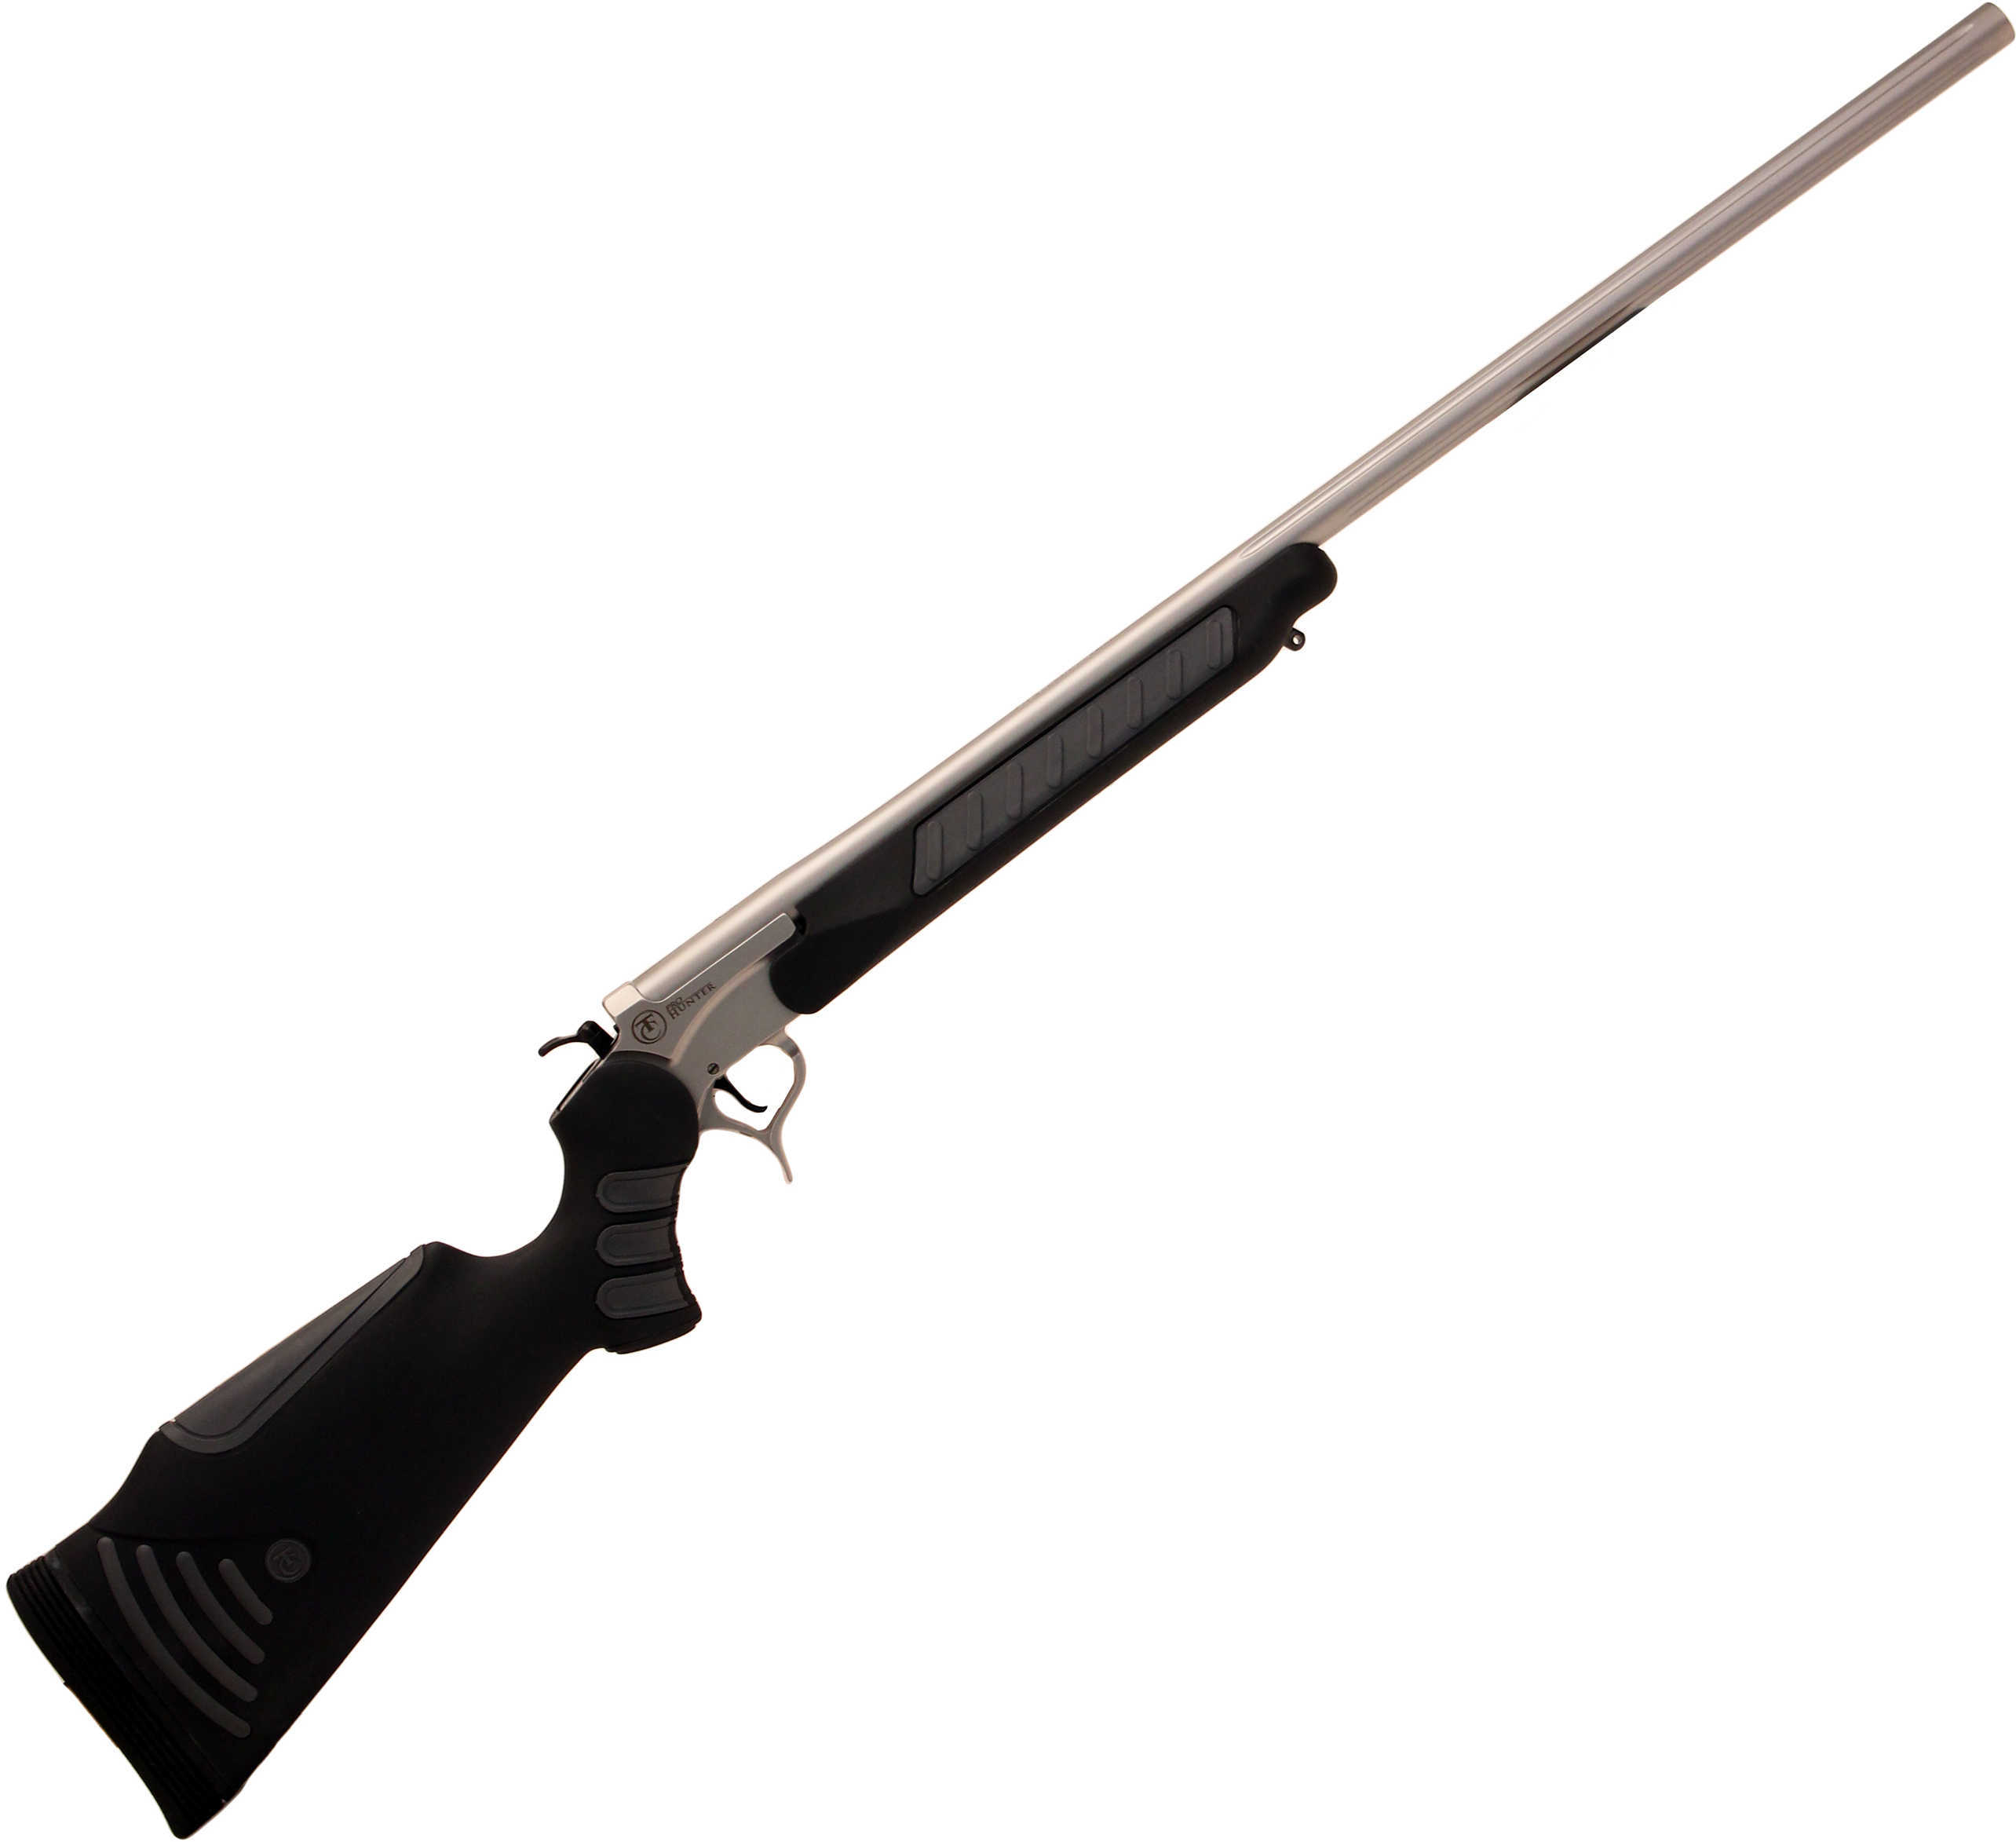 Thompson/Center Arms Center Encore Pro Hunter Rifle 243 Winchester 28" Barrel Single-Shot Capacity Stainless Steel